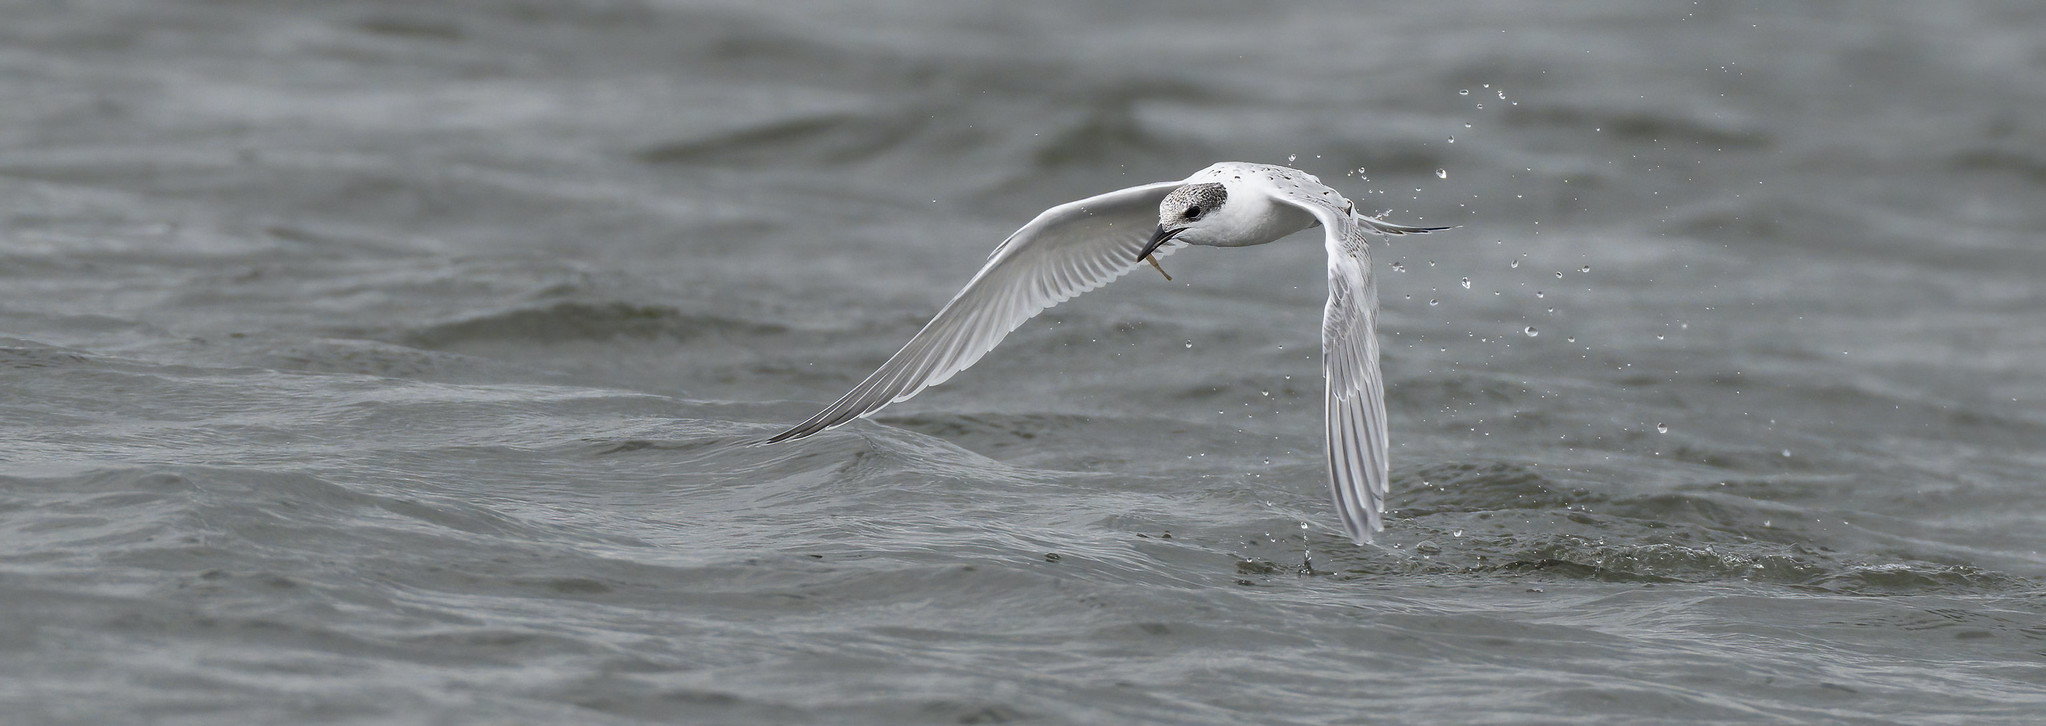 Sandwich Tern - diving and scooping food....